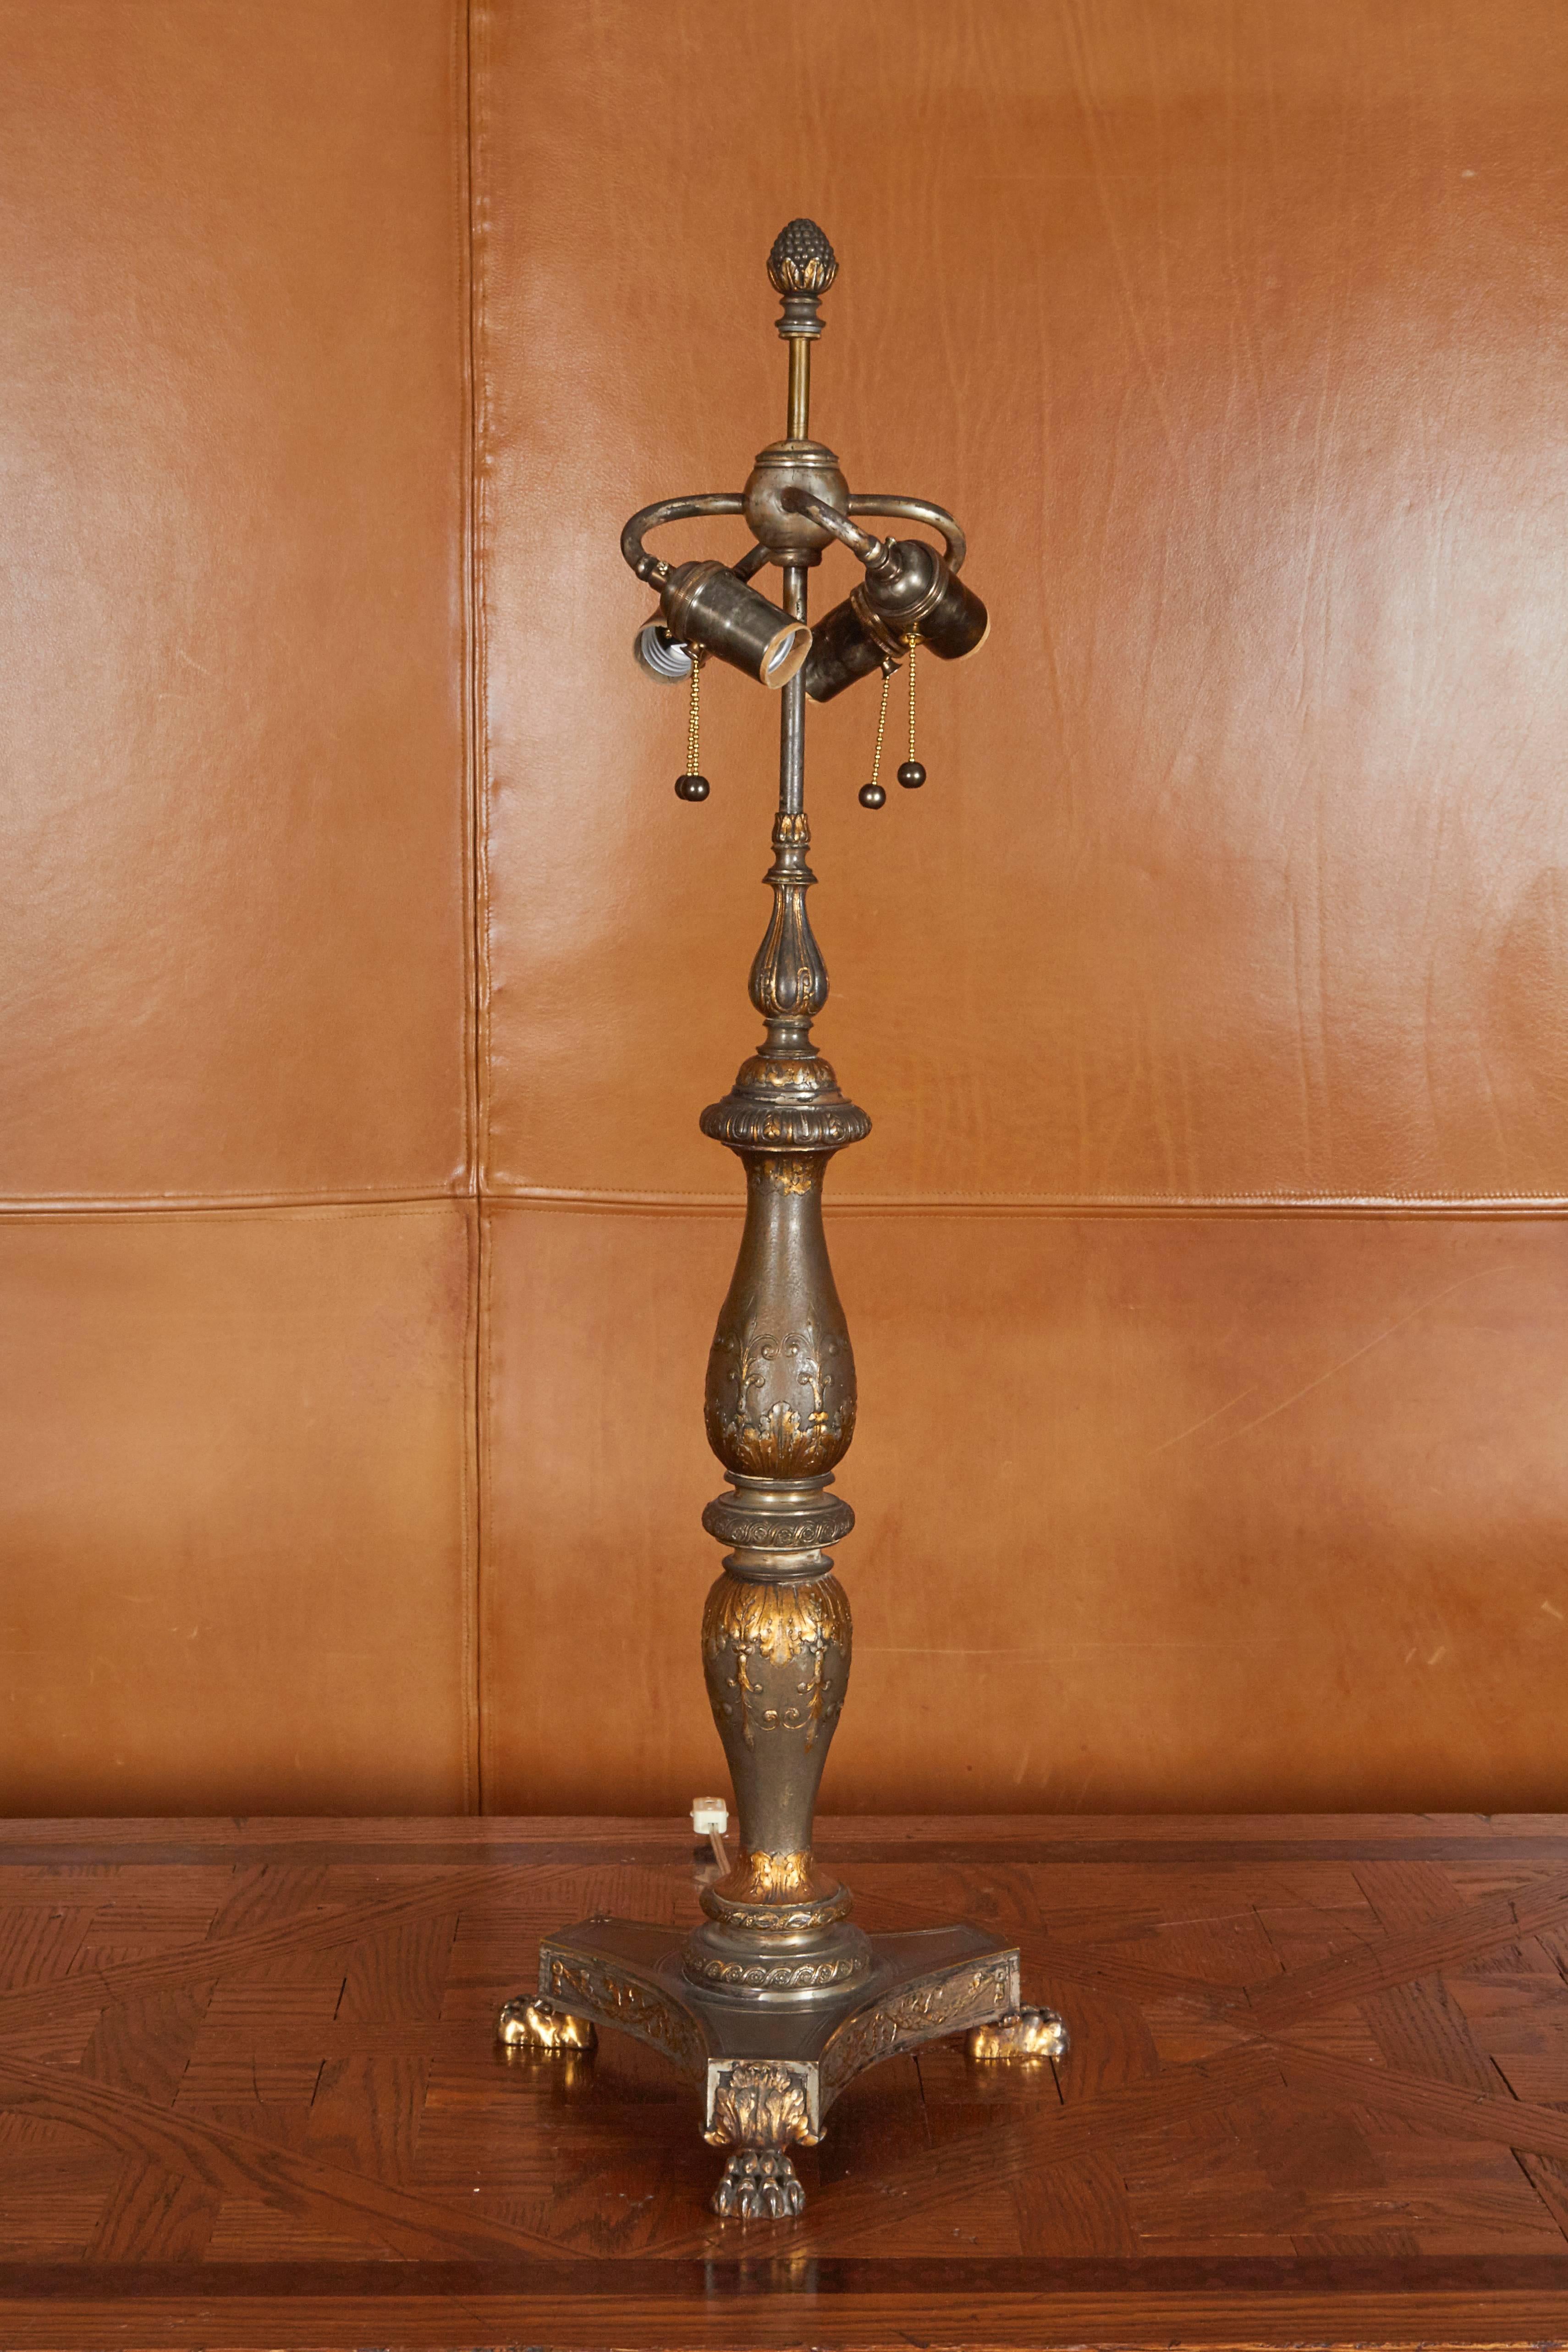 Large-scale table lamp most likely by the Birmingham, England firm Thomas Messenger and Sons who were one of the most important makers of oil and Argand lamps until the mid-19th century. Converted to electricity in the early 20th century.